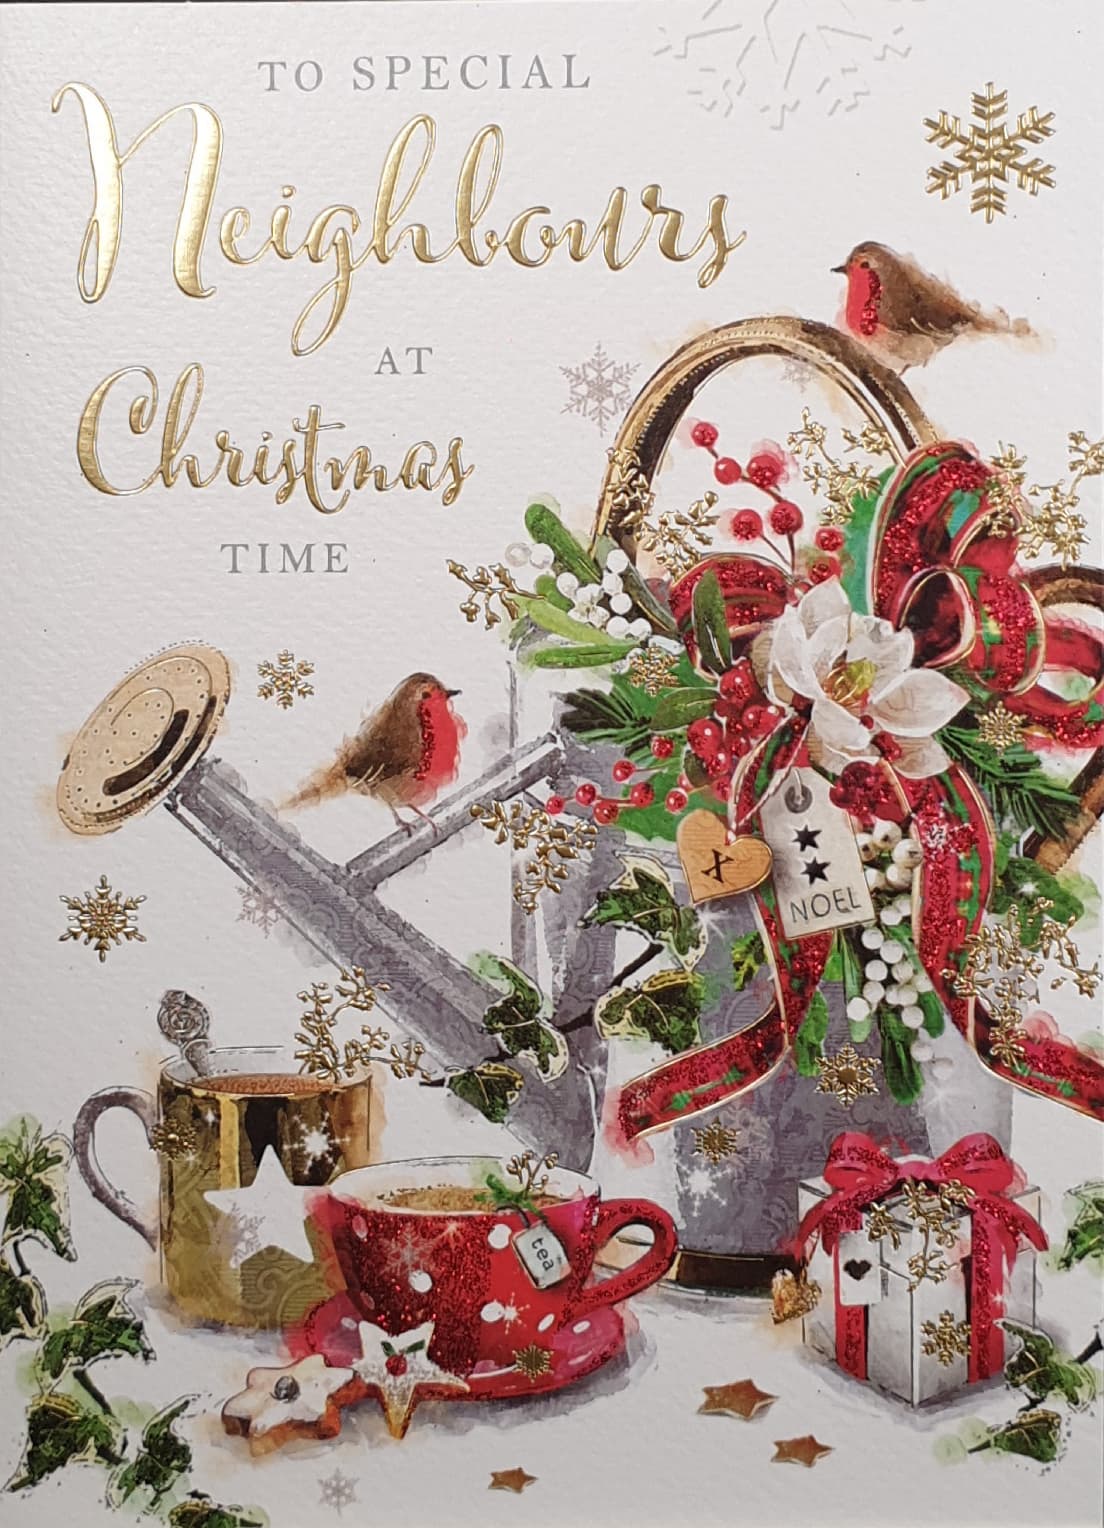 Neighbours Christmas Card - Christmas Decorations & Robins on Watering Can